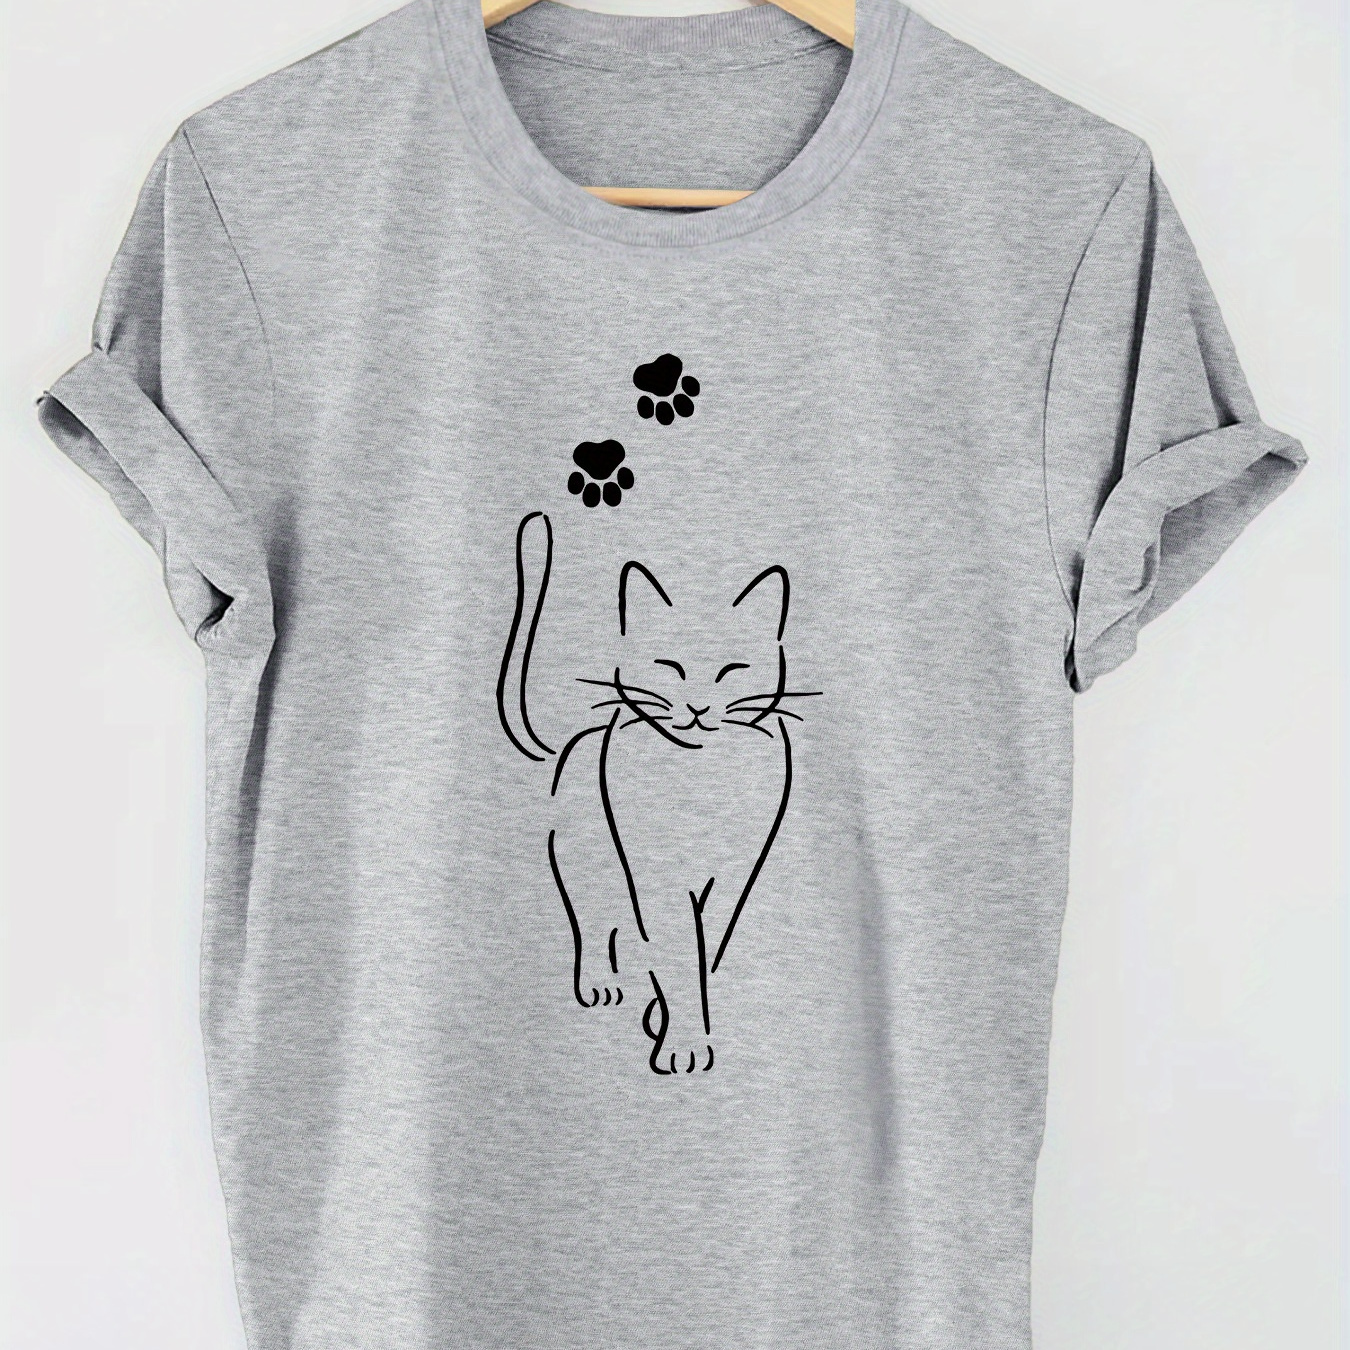 

Cat & Paws Print T-shirt, Short Sleeve Crew Neck Casual Top For Summer & Spring, Women's Clothing